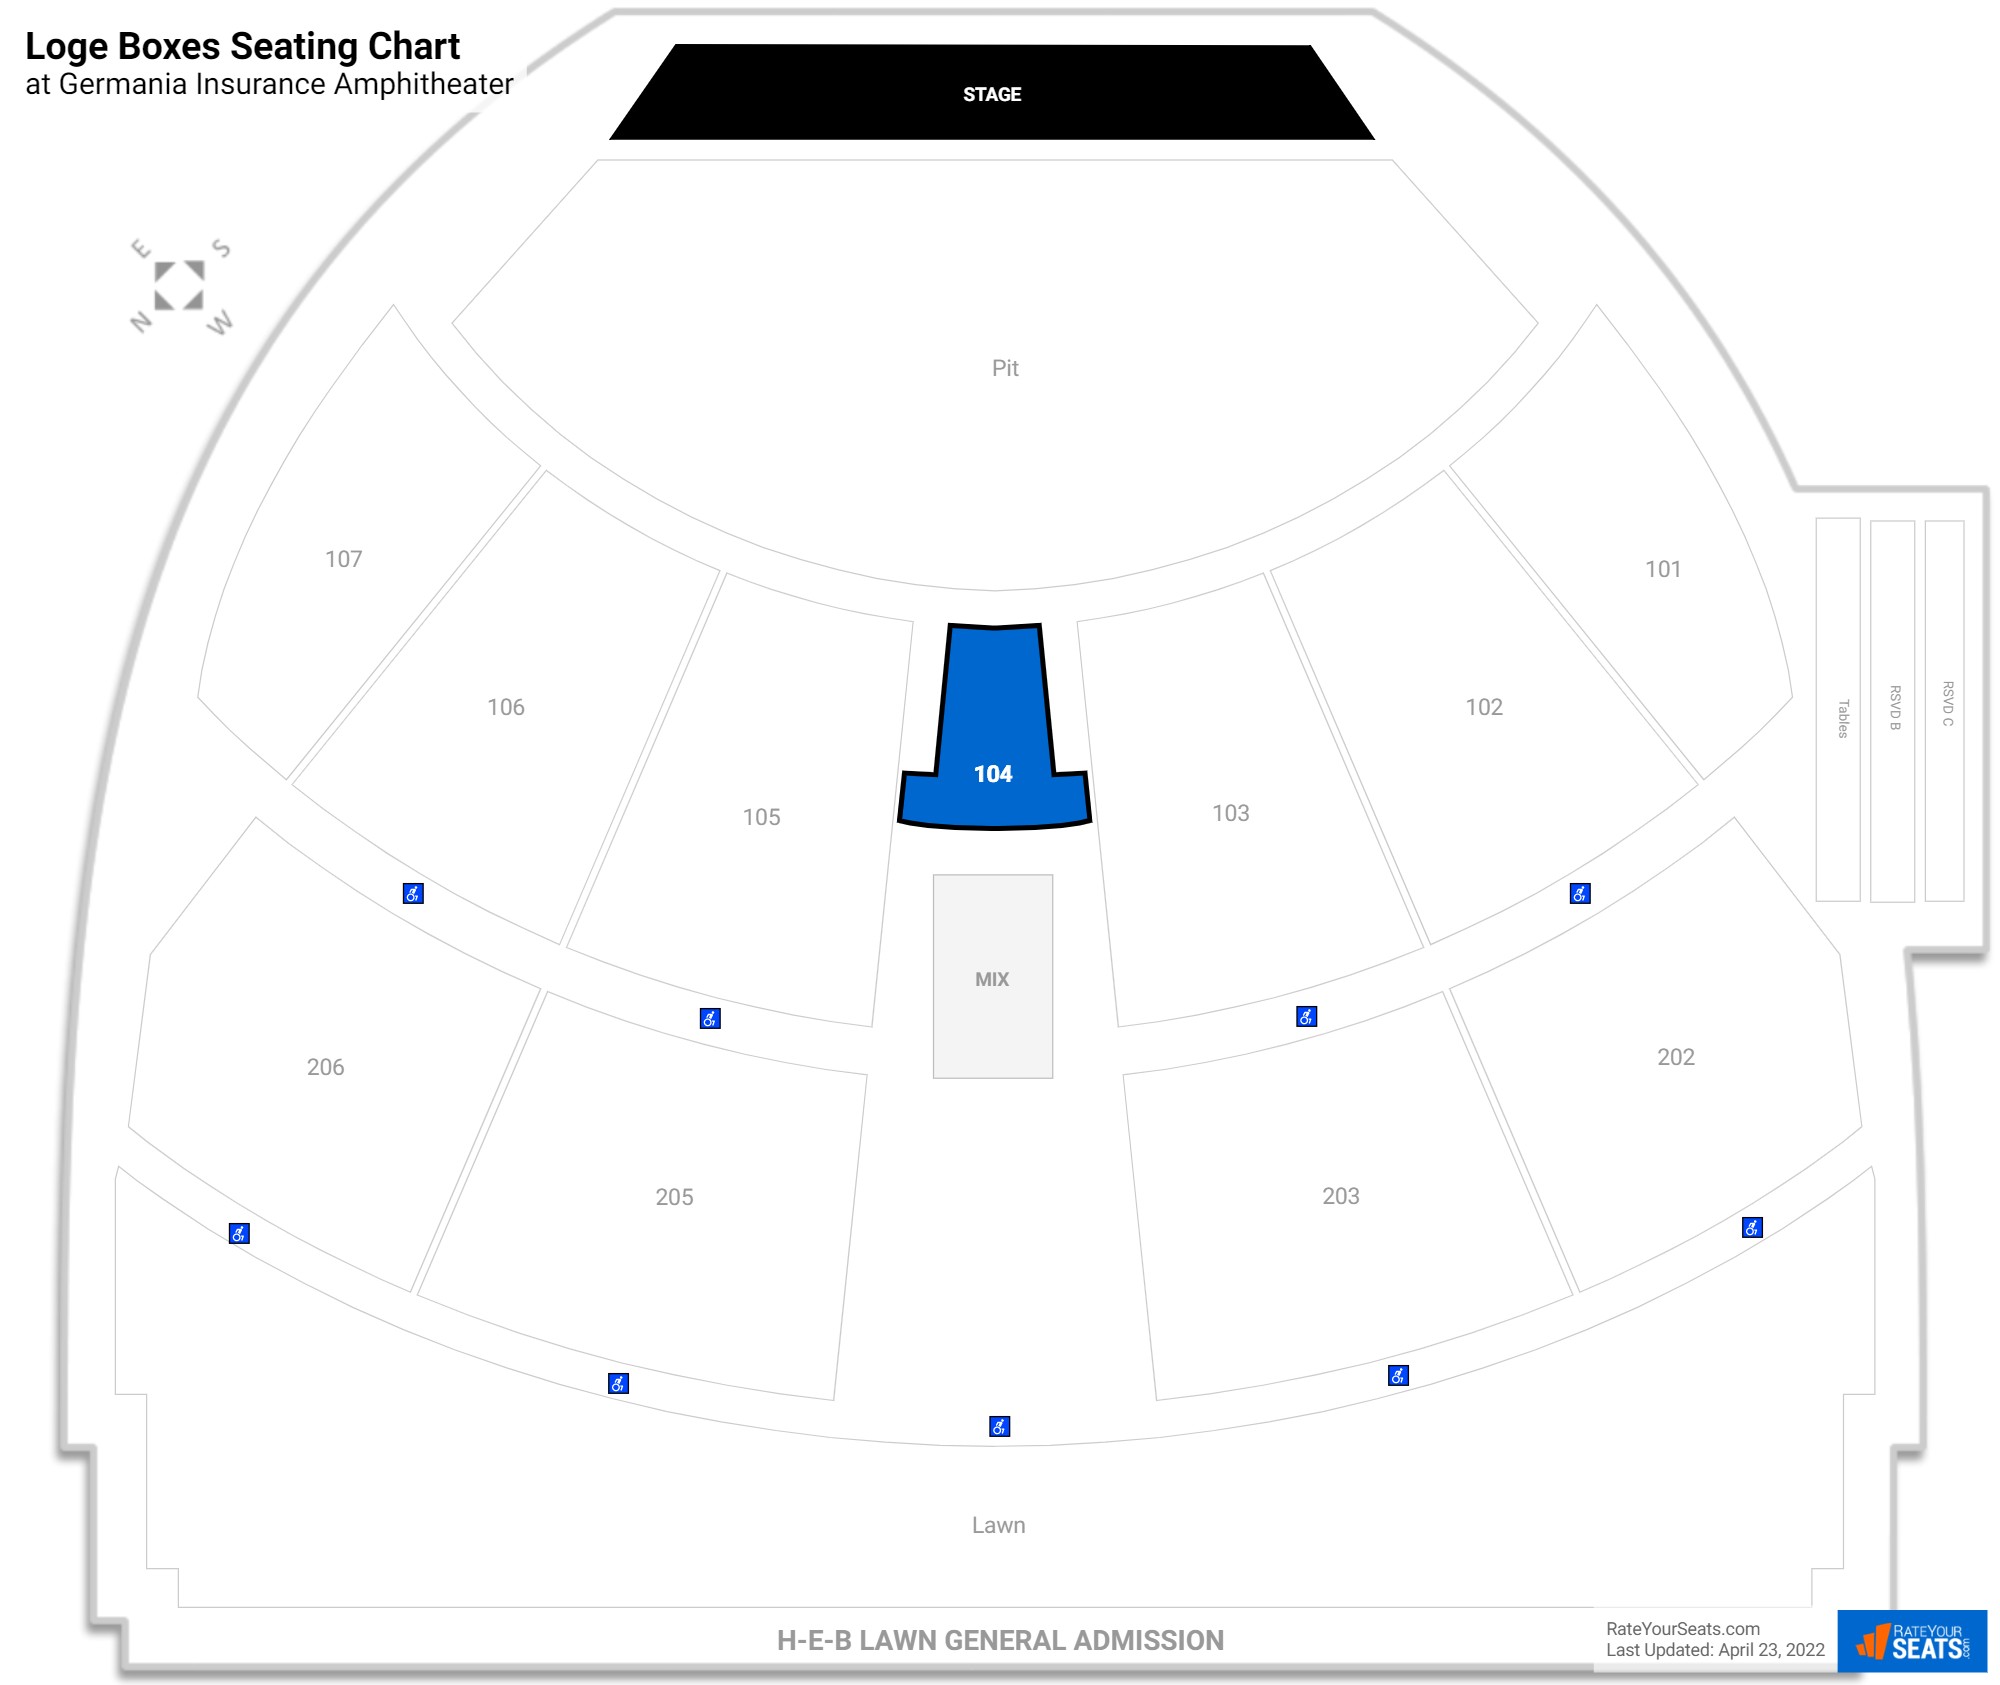 Concert Loge Boxes Seating Chart at Germania Insurance Amphitheater